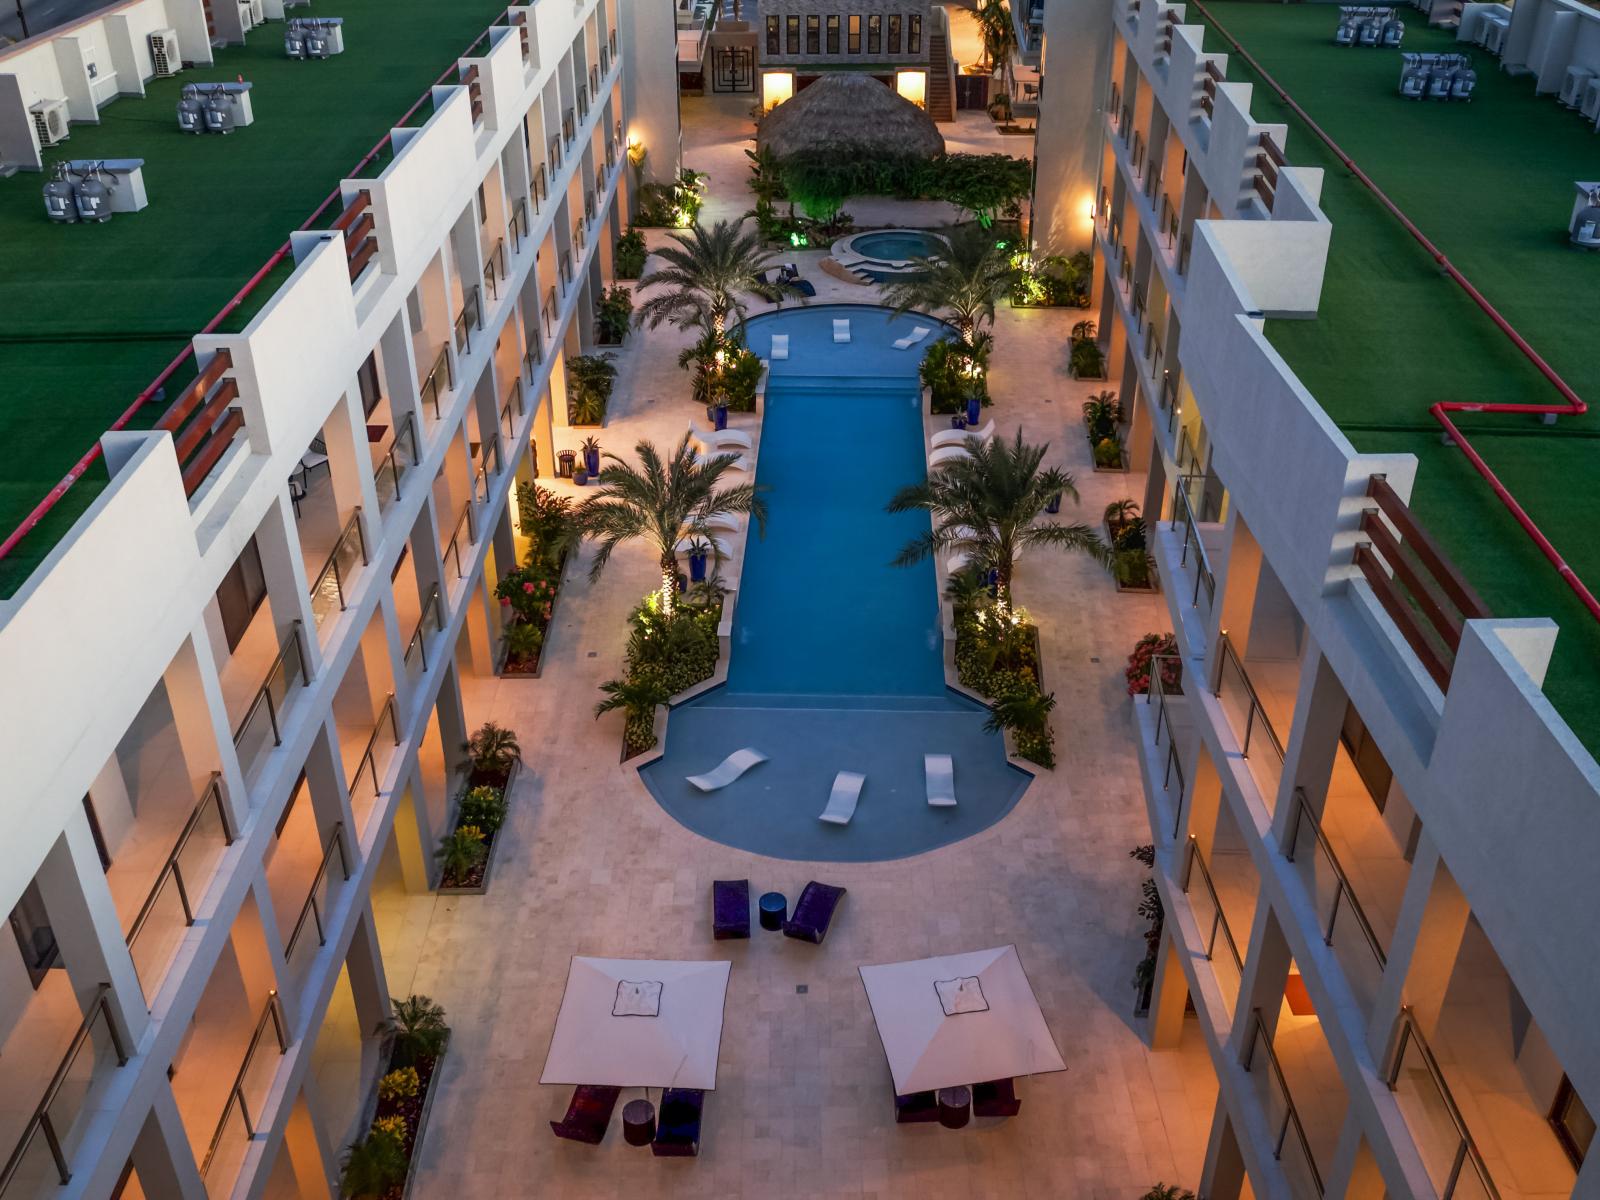 Condominium pool area, where relaxation meets perfection.